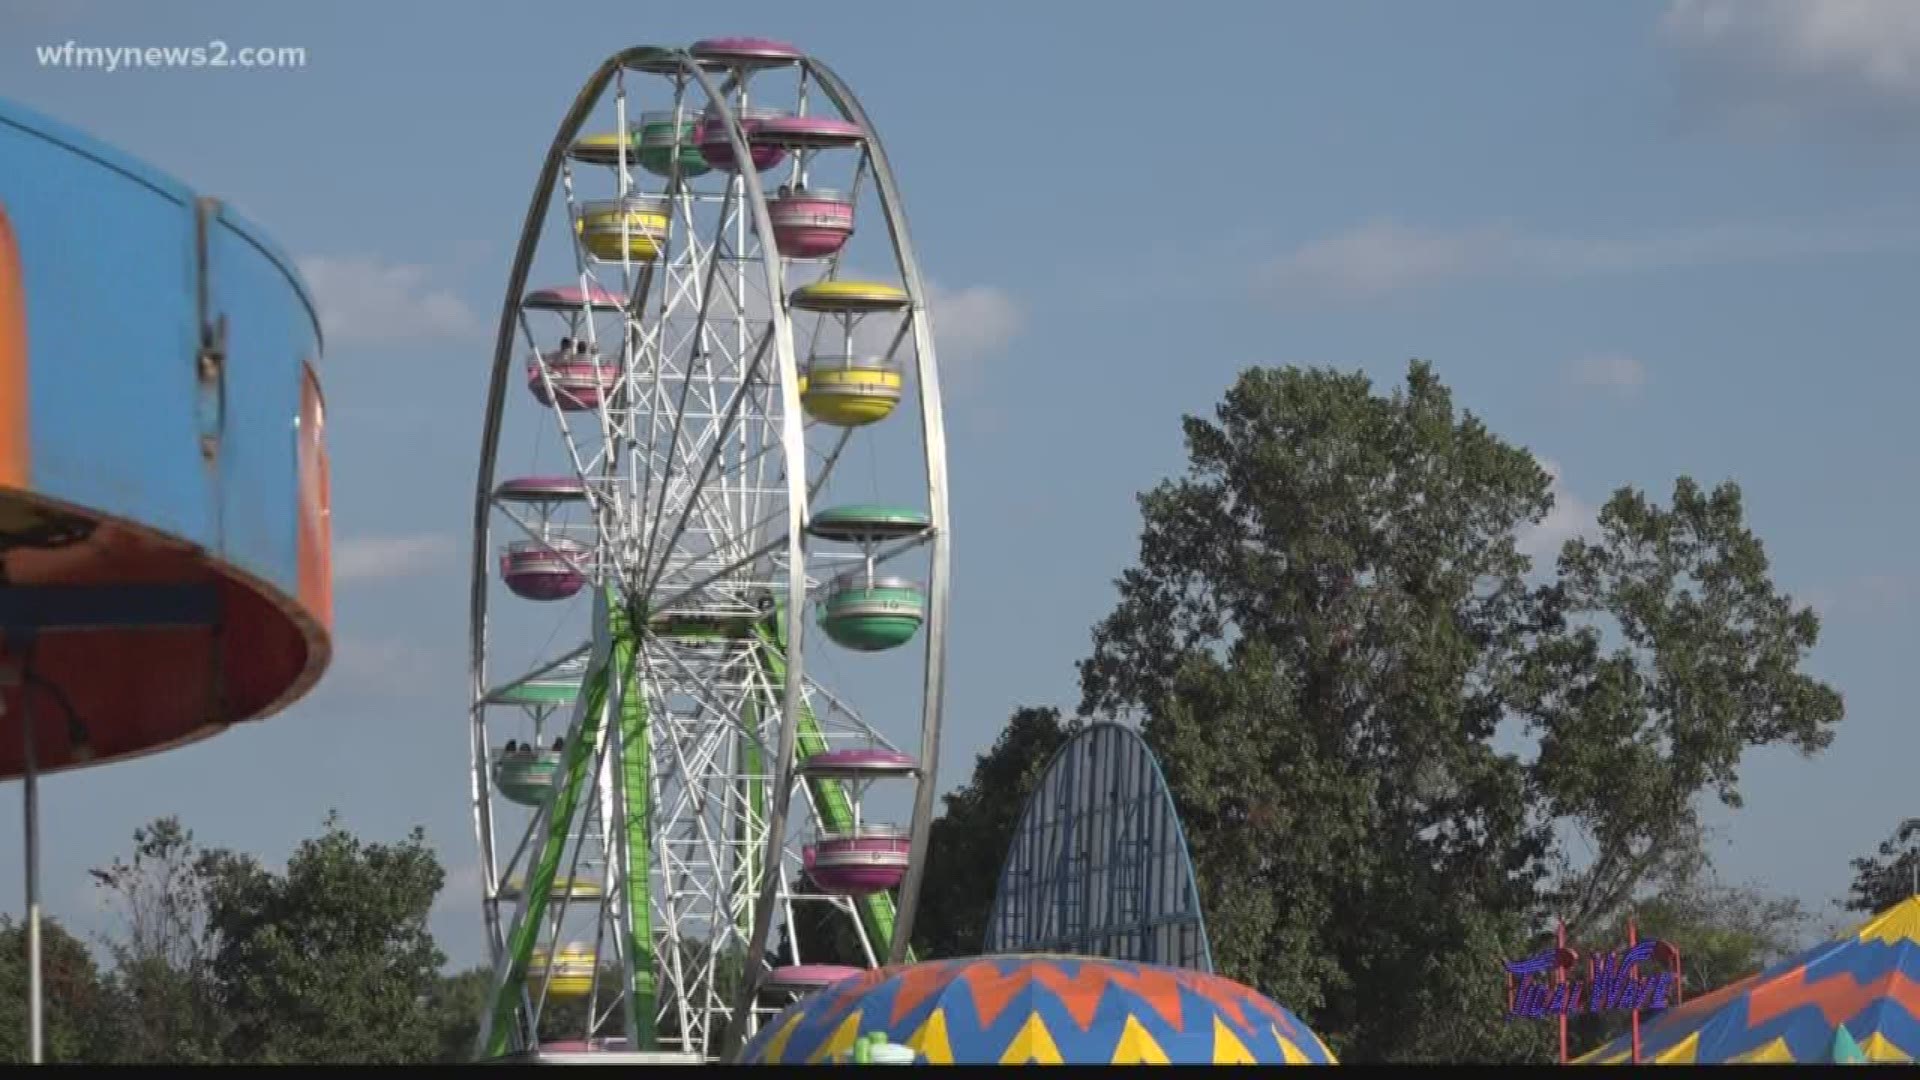 Jenna Nicholson’s autistic son had a meltdown after the Davidson County Fair policy required he wear a wristband. The Dixie Classic Fair is making changes to help.